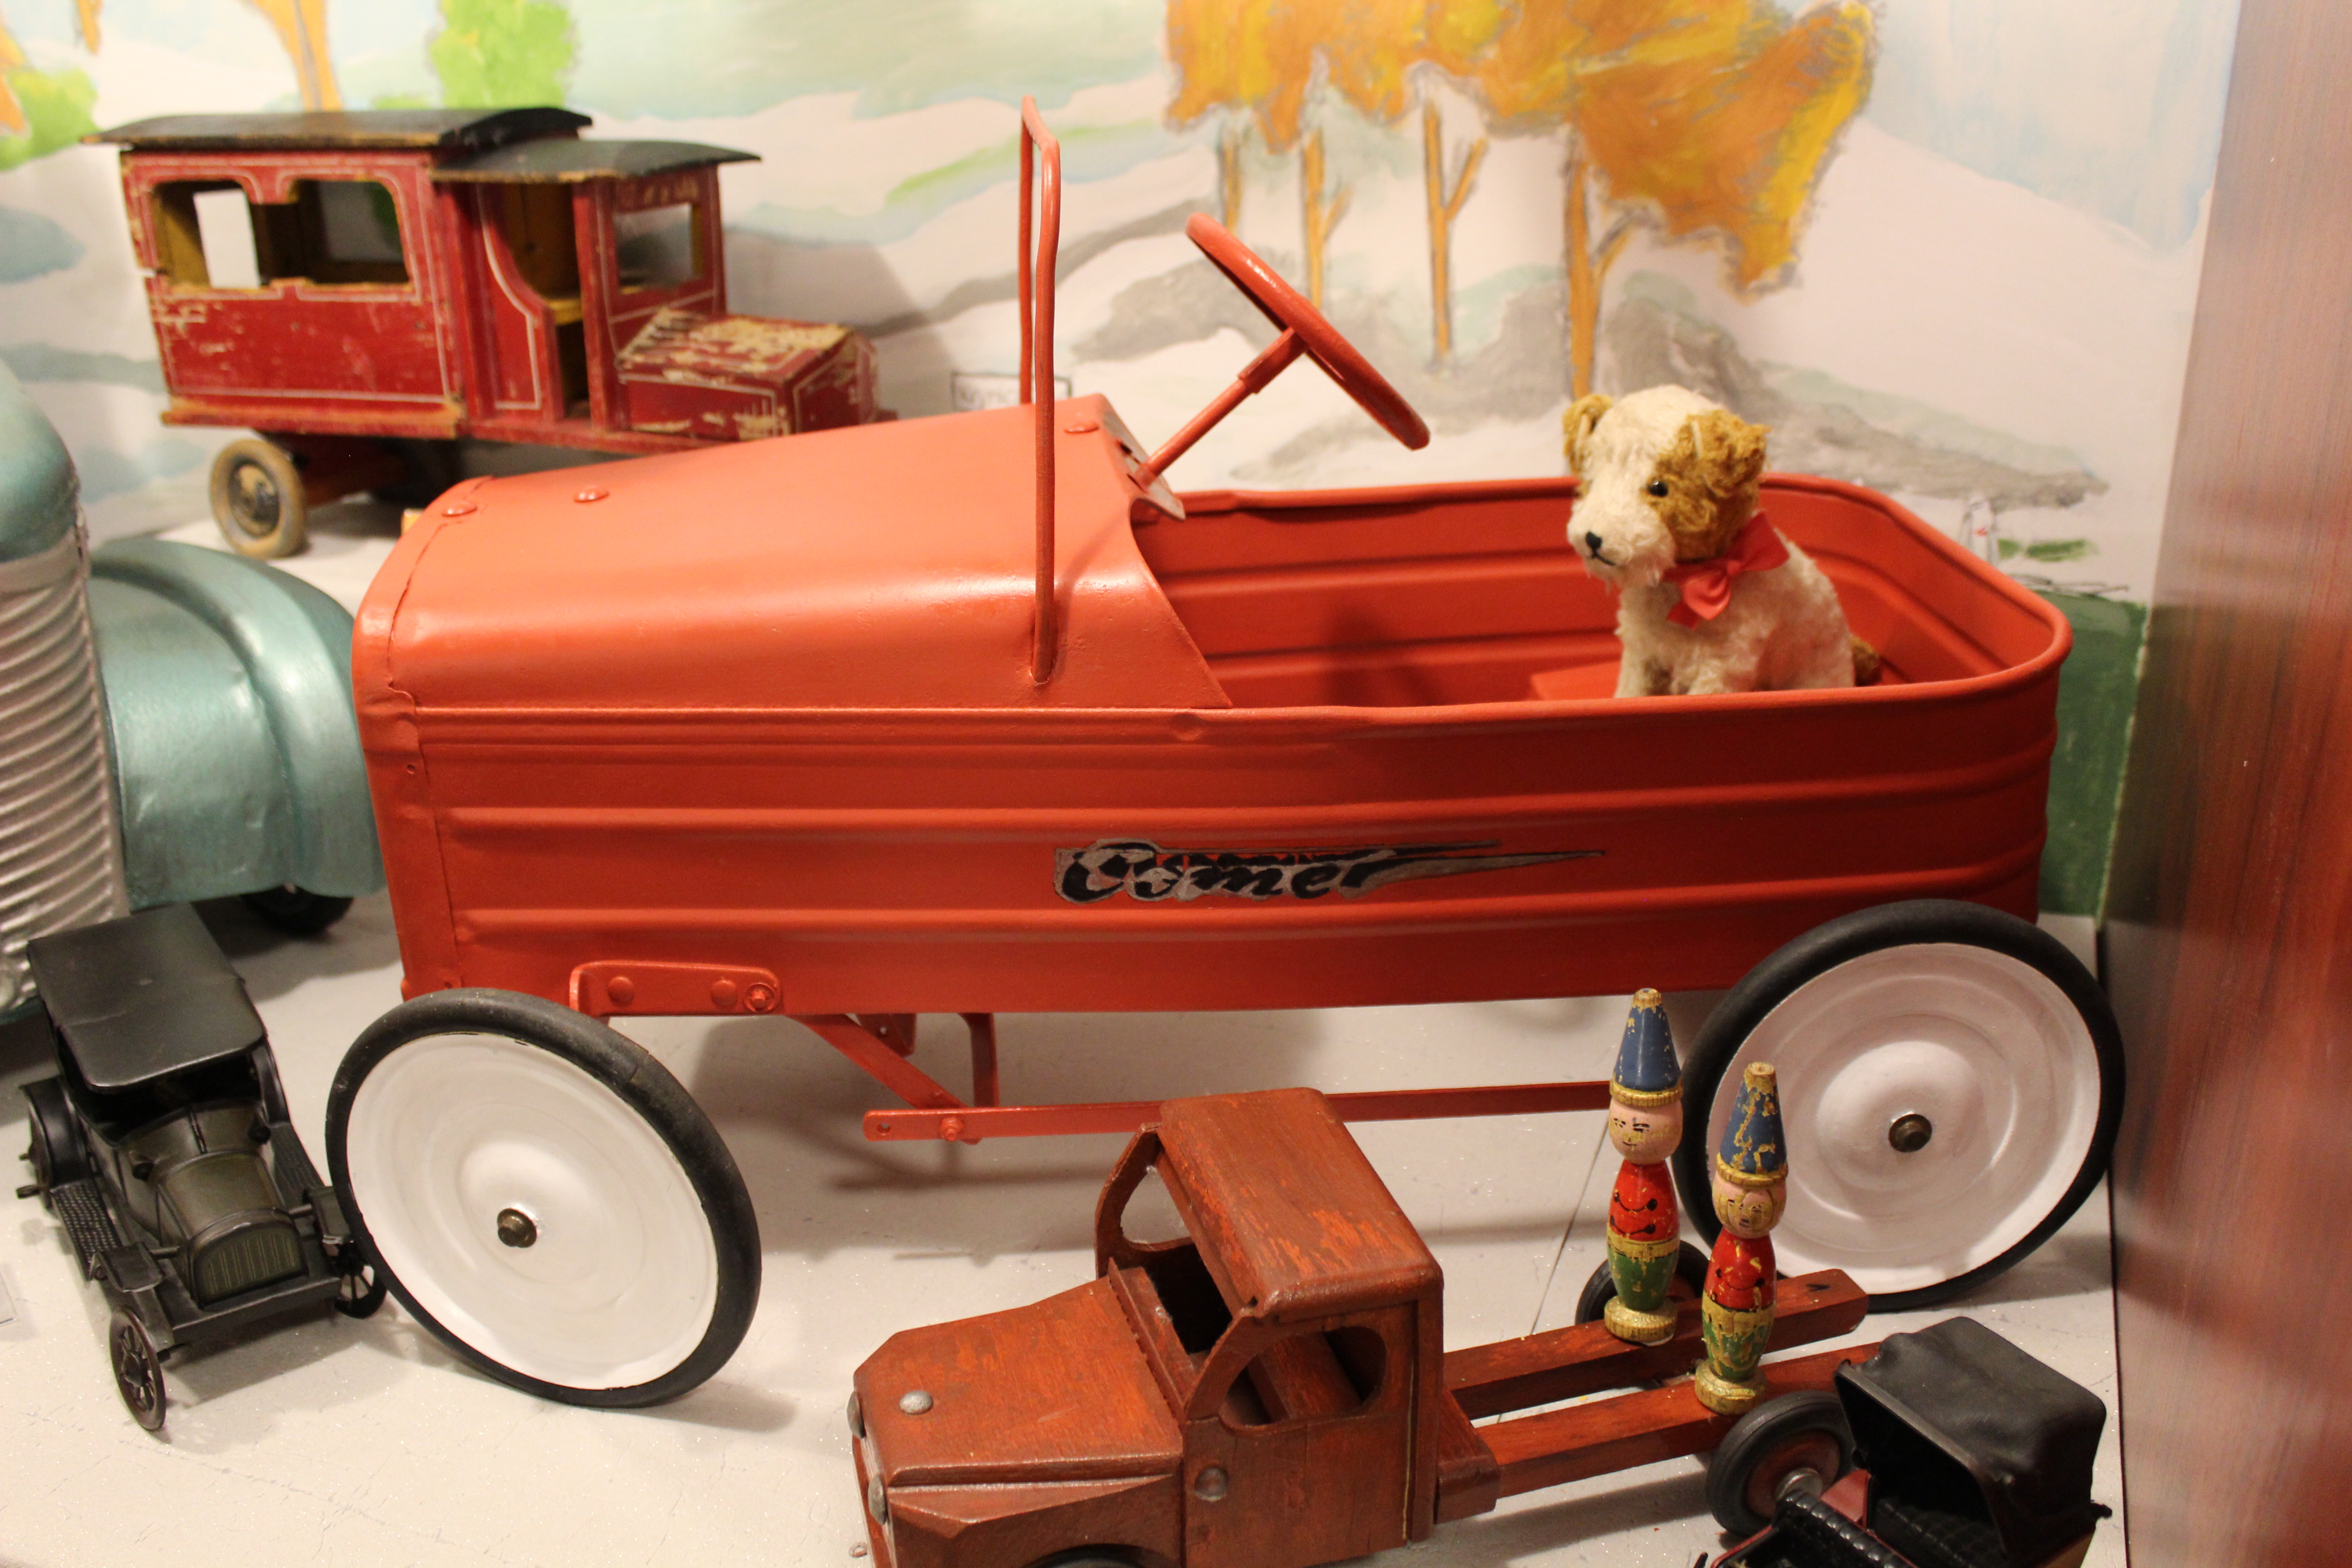 MUSEUM OF TOYS